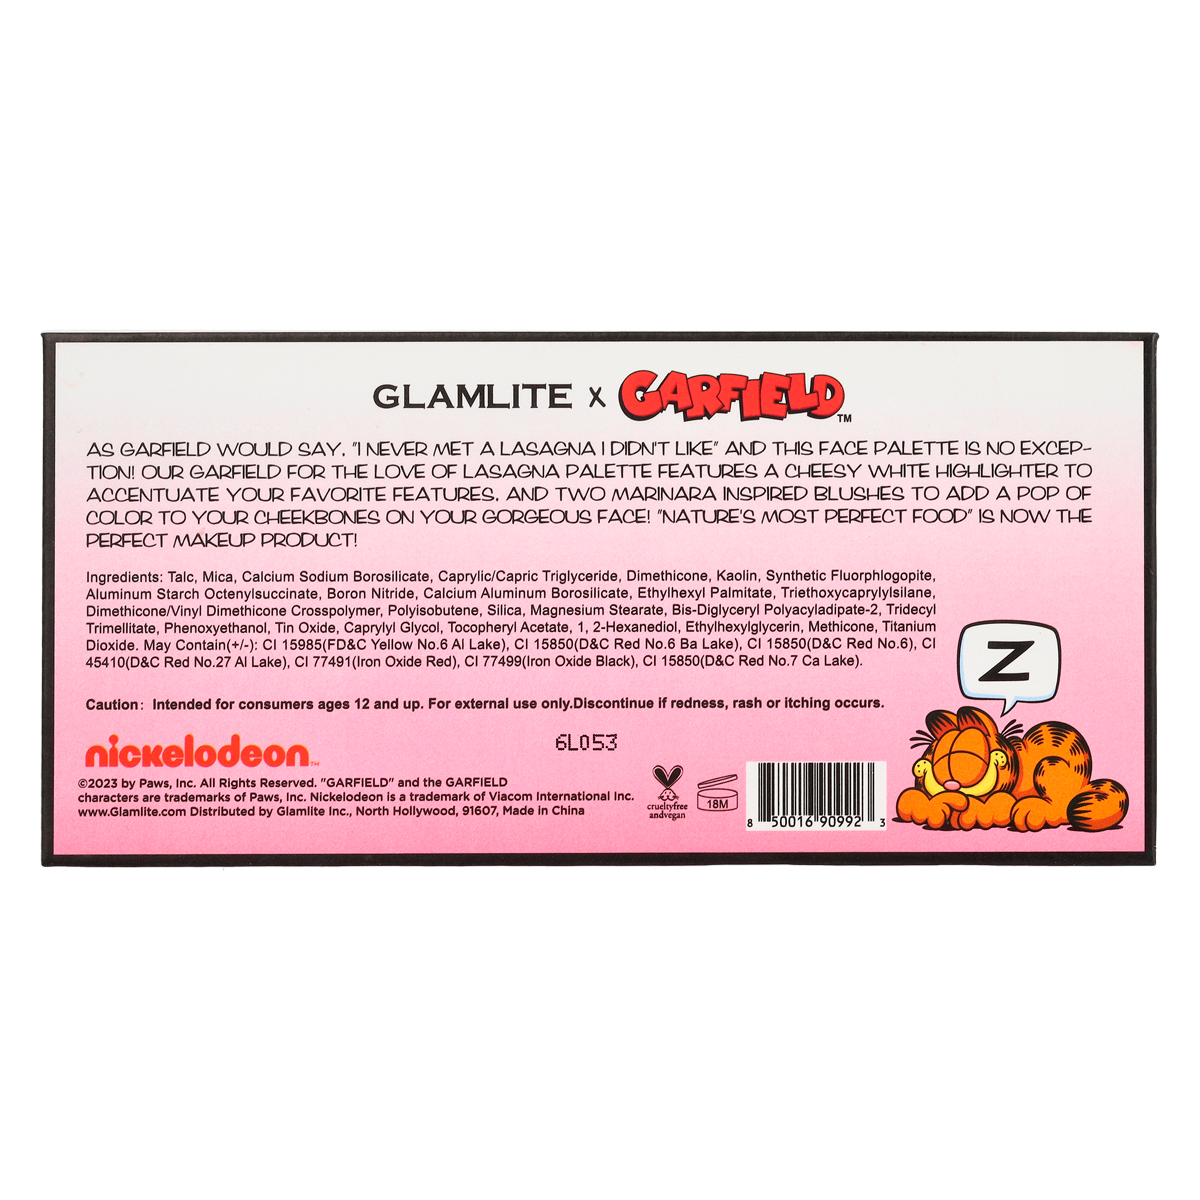 Garfield x Glamlite For The Love Of Lasagna Face palette